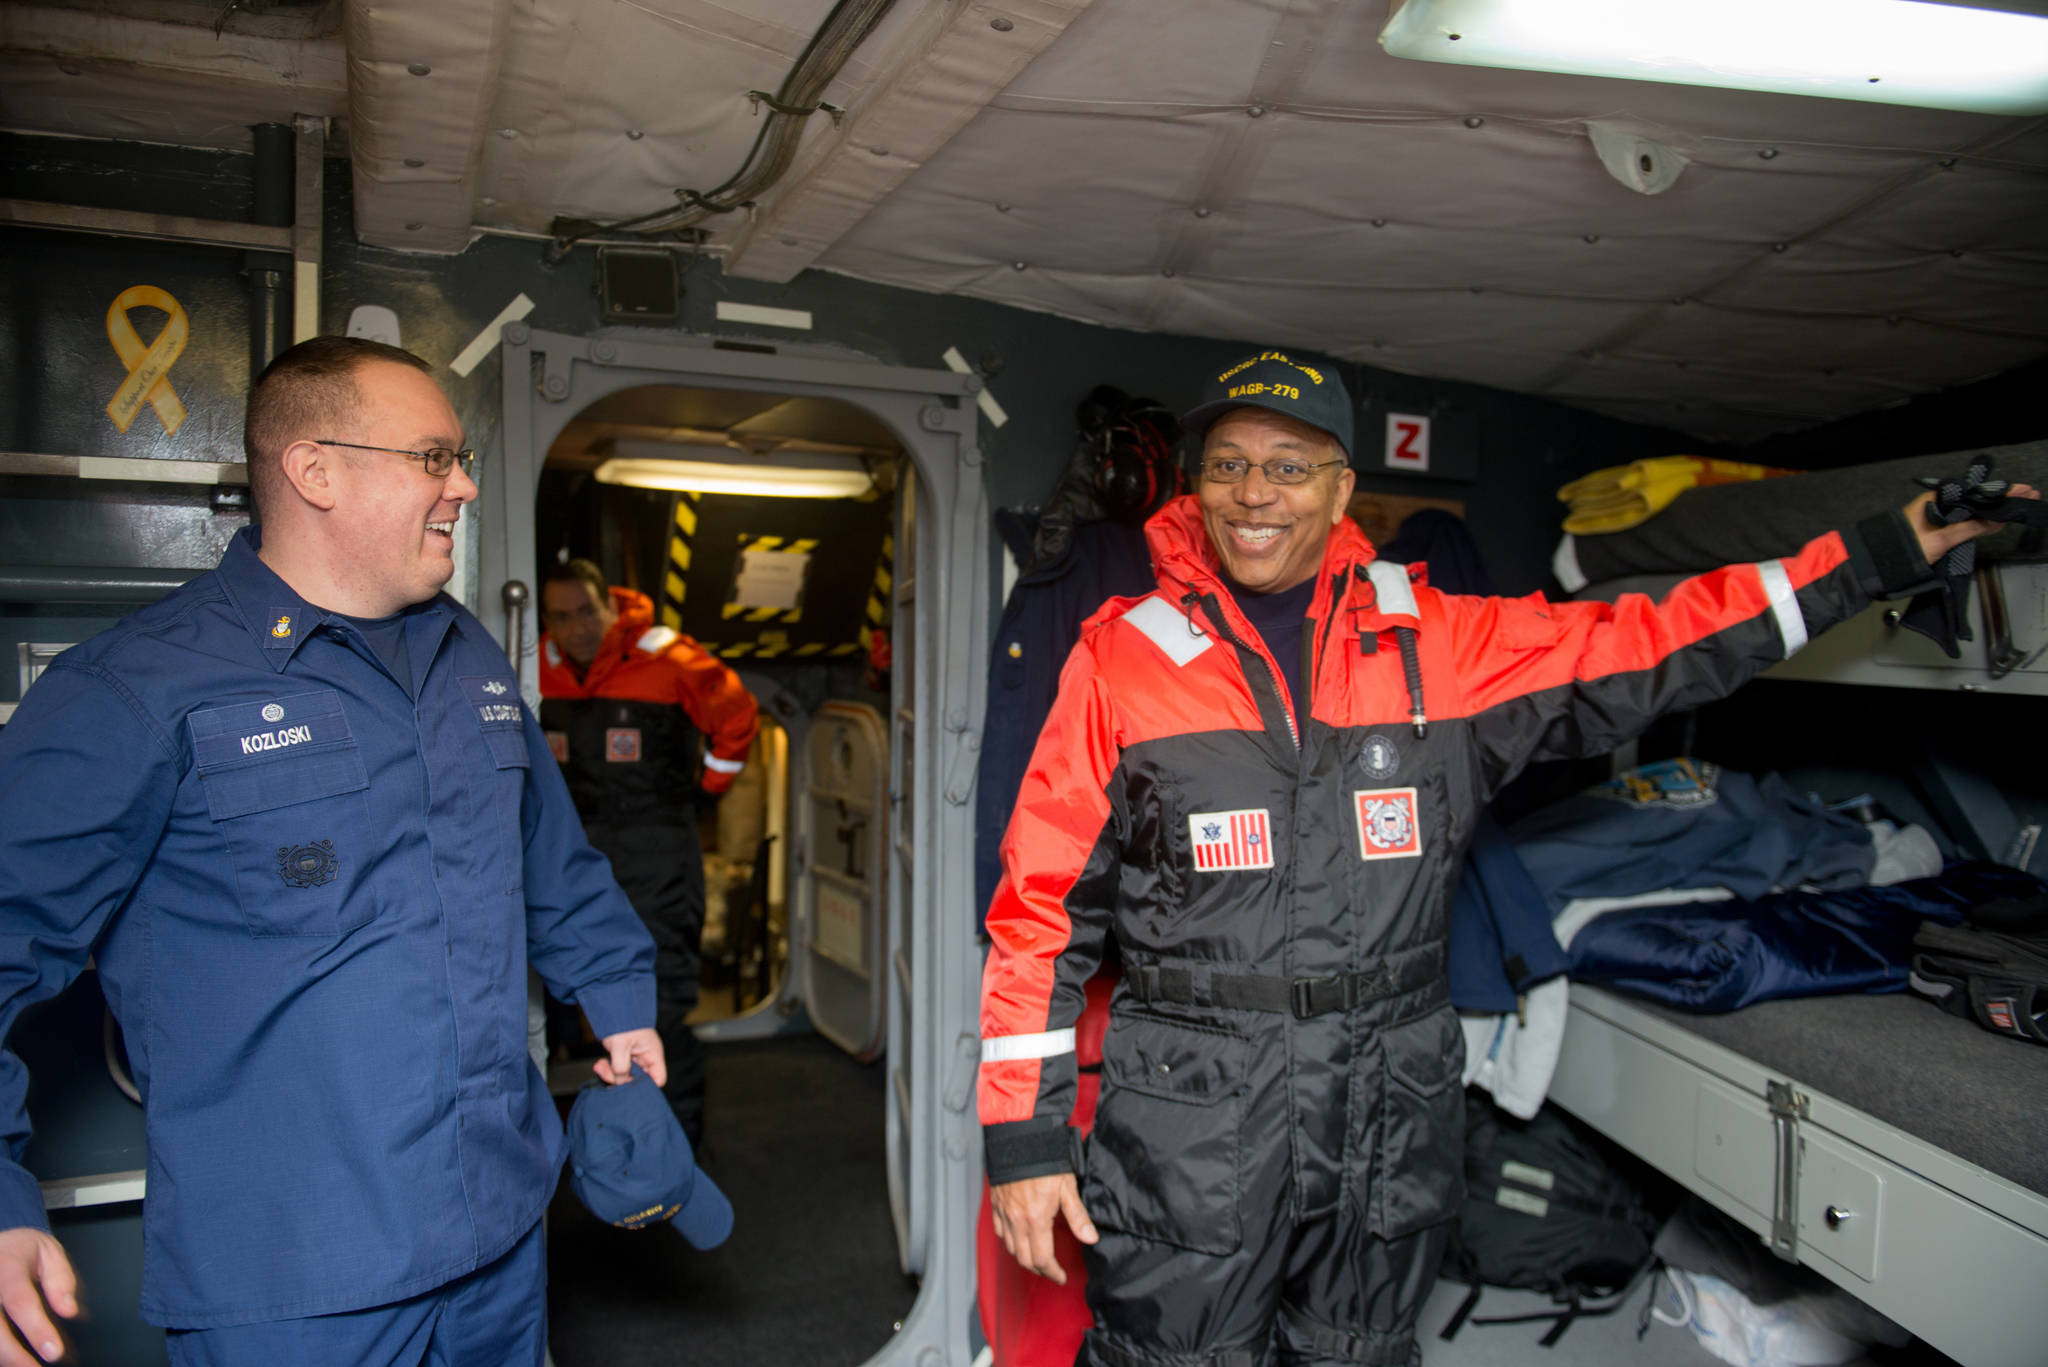 Chief Petty Officer Michael Kozloski, officer-in-charge of Coast Guard Cutter Chock, and Lt. Gov. Boyd K. Rutherford laugh during the lieutenant governor’s visit aboard the cutter moored up at Curtis Bay in Maryland, Wednesday, Jan. 20, 2016. Rutherford visited with Coast Guard crews from Sector Baltimore, Station Curtis Bay, and the cutter Chock. Kozloski was later promoted to Chief Warrant Officer (U.S. Coast Guard photo by Petty Officer David R. Marin)